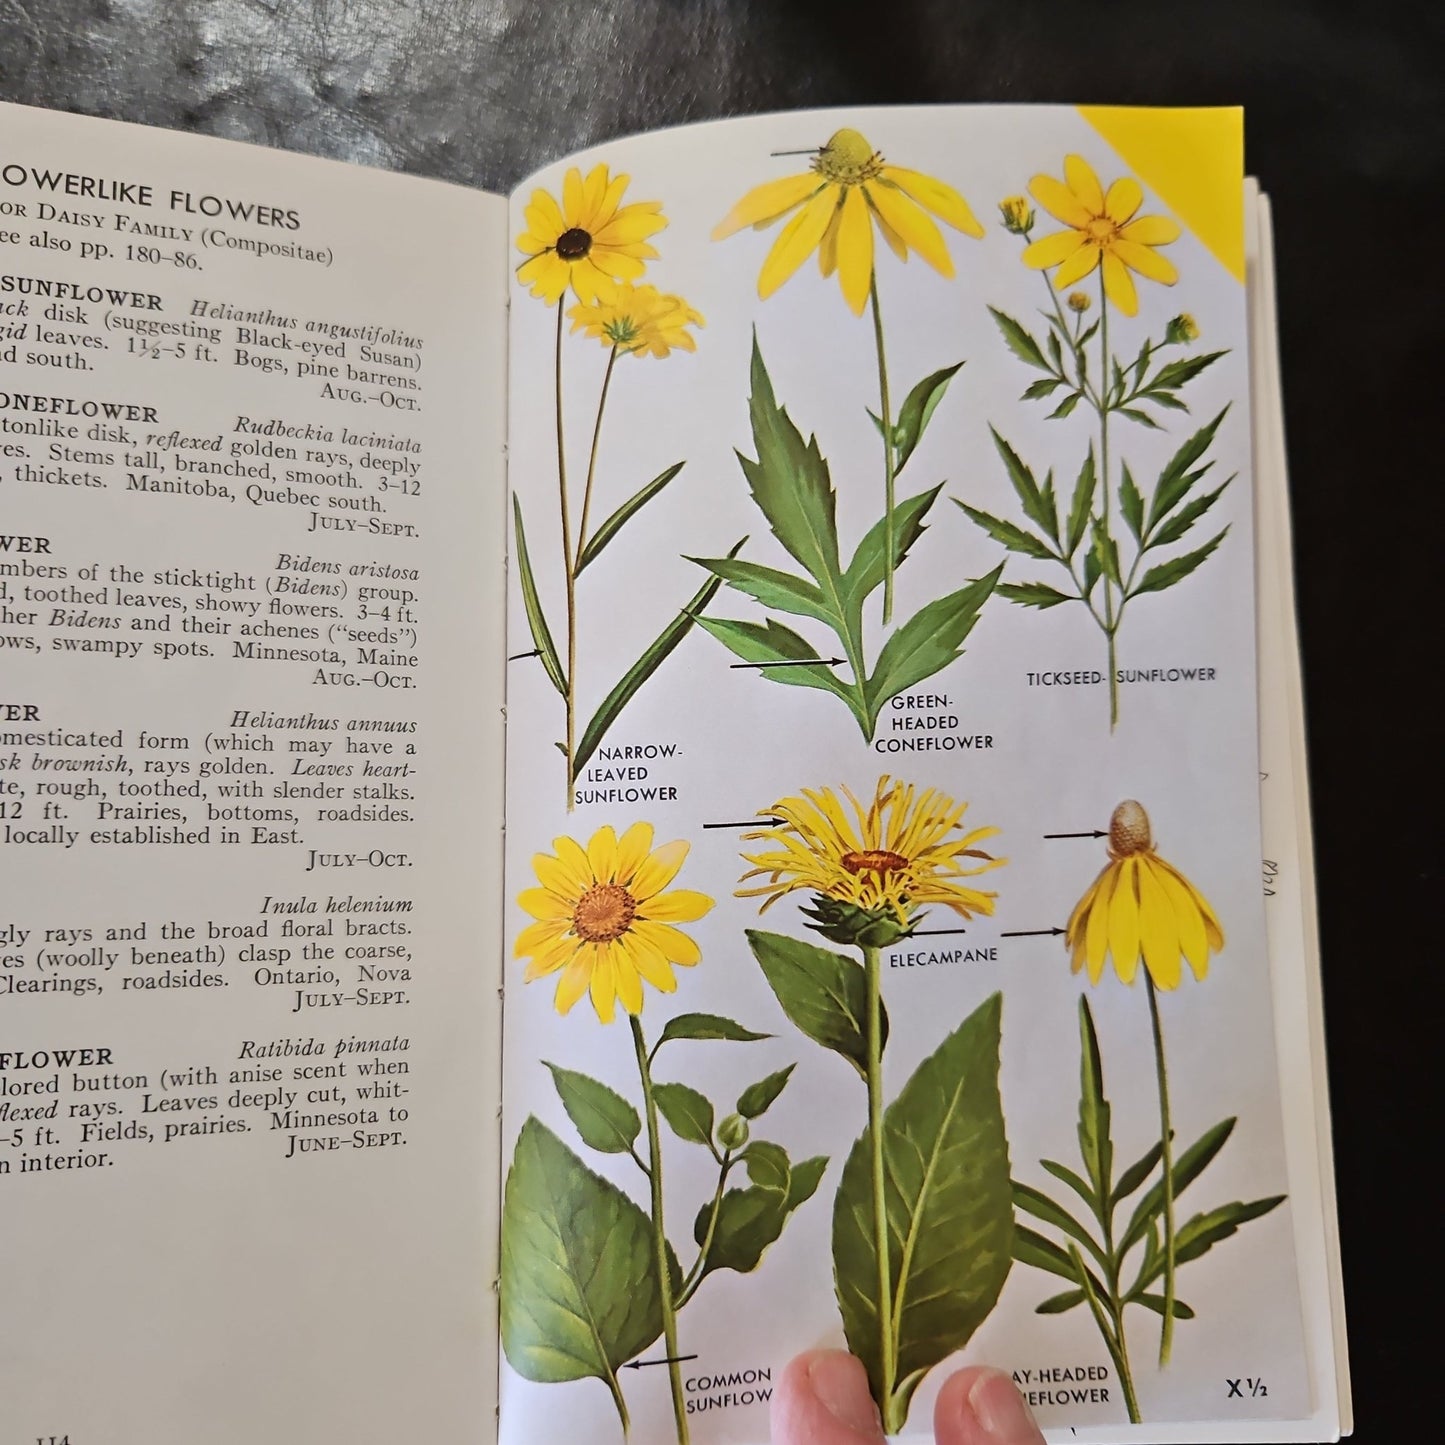 A Foeld Guide to Wildflowers - [ash-ling] Booksellers